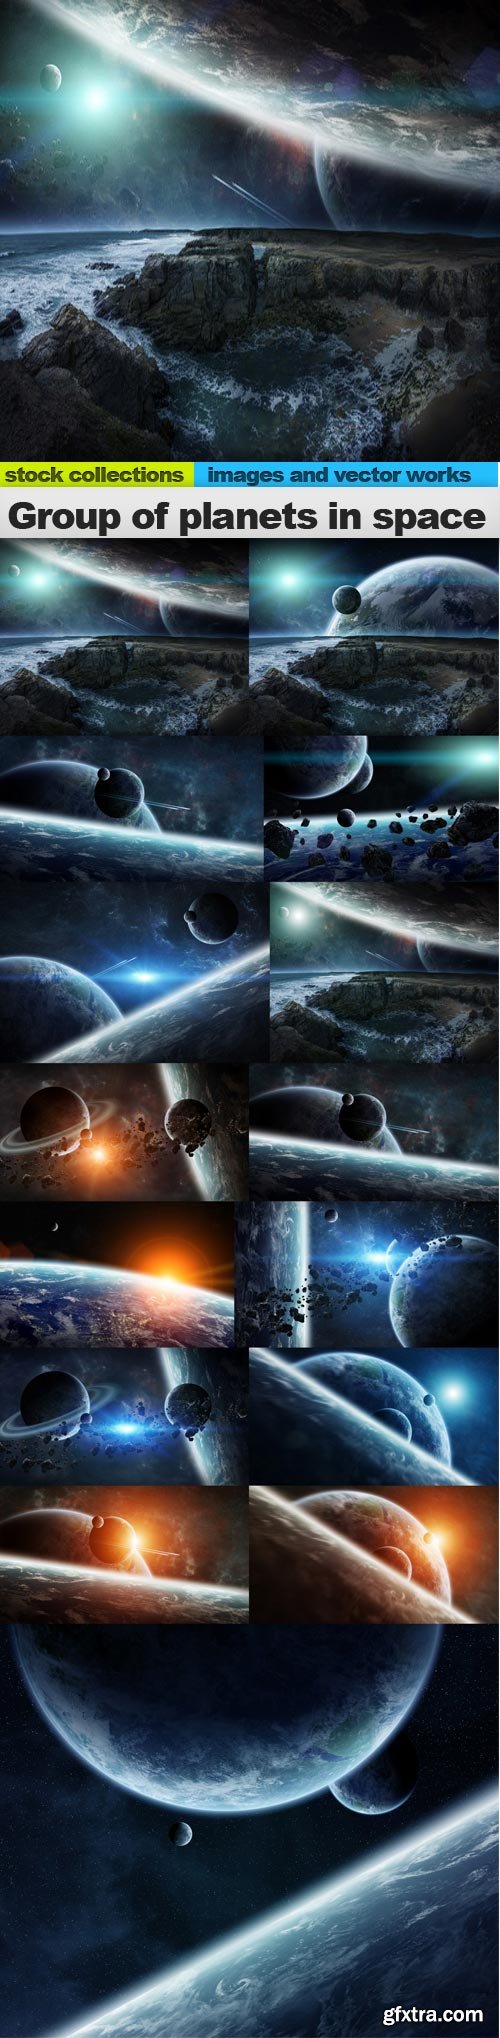 Group of planets in space, 15 x UHQ JPEG